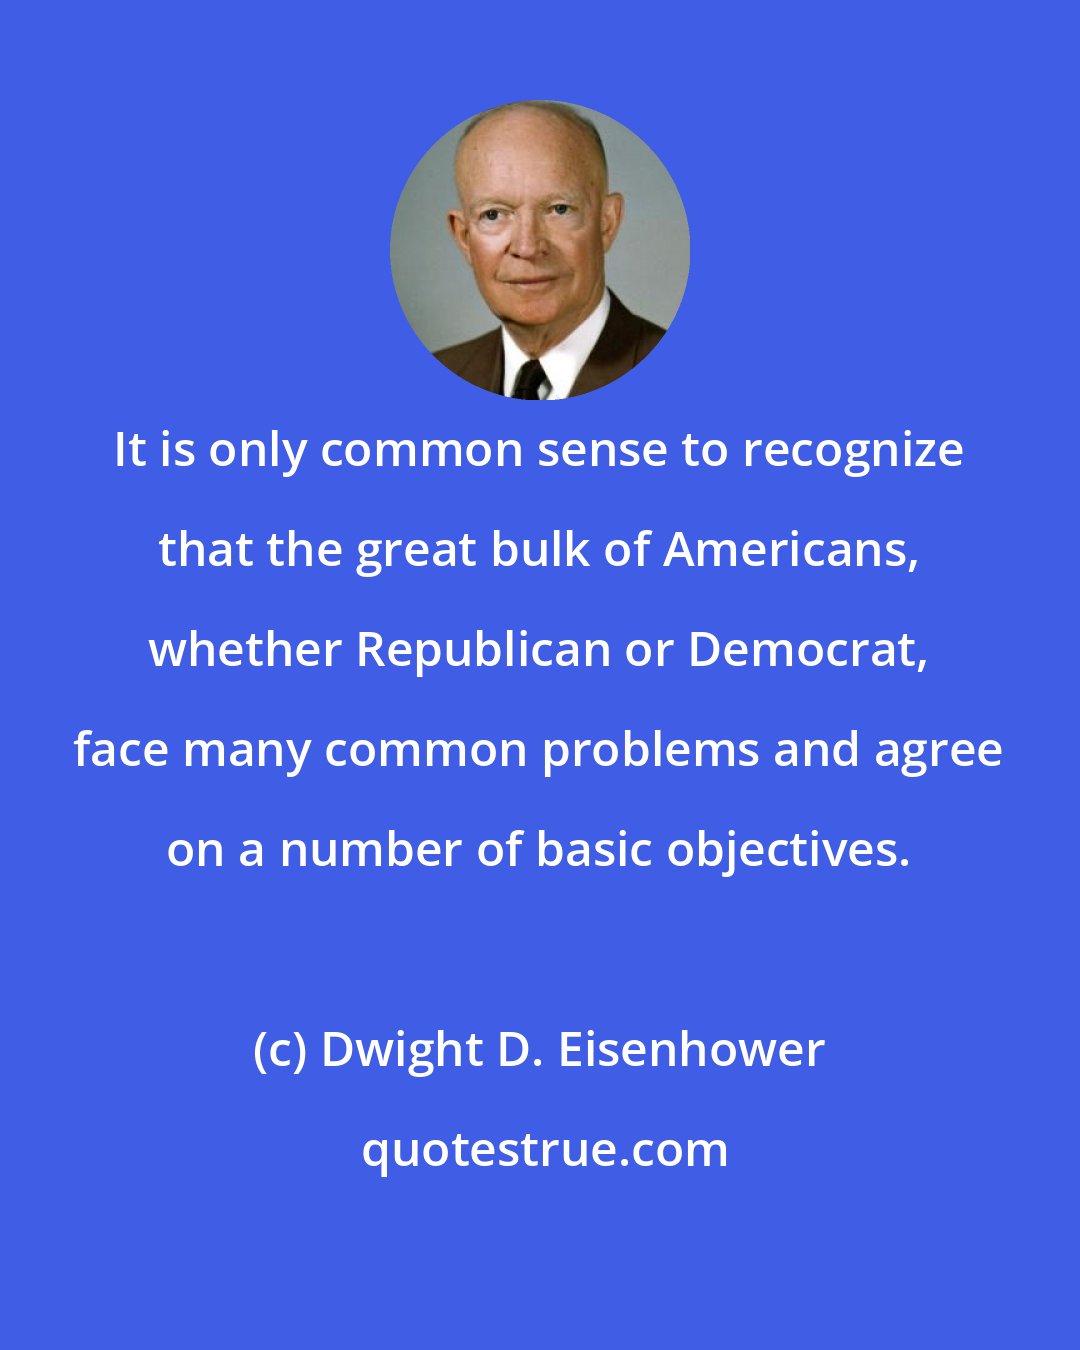 Dwight D. Eisenhower: It is only common sense to recognize that the great bulk of Americans, whether Republican or Democrat, face many common problems and agree on a number of basic objectives.